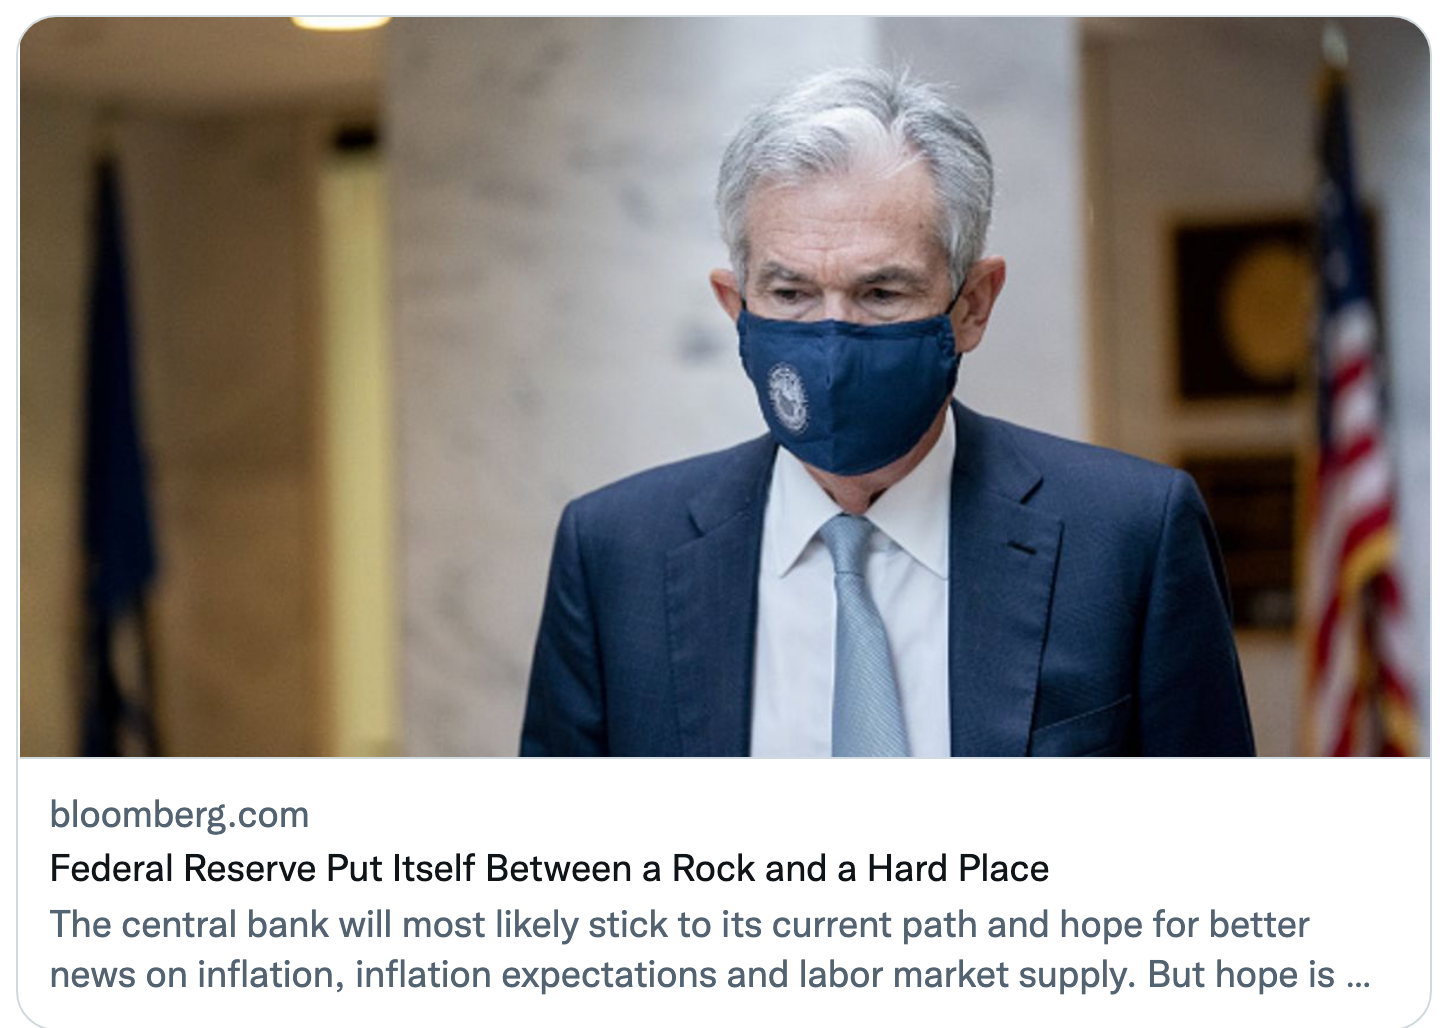 https://www.bloomberg.com/opinion/articles/2021-11-15/federal-reserve-put-itself-between-a-rock-and-a-hard-place